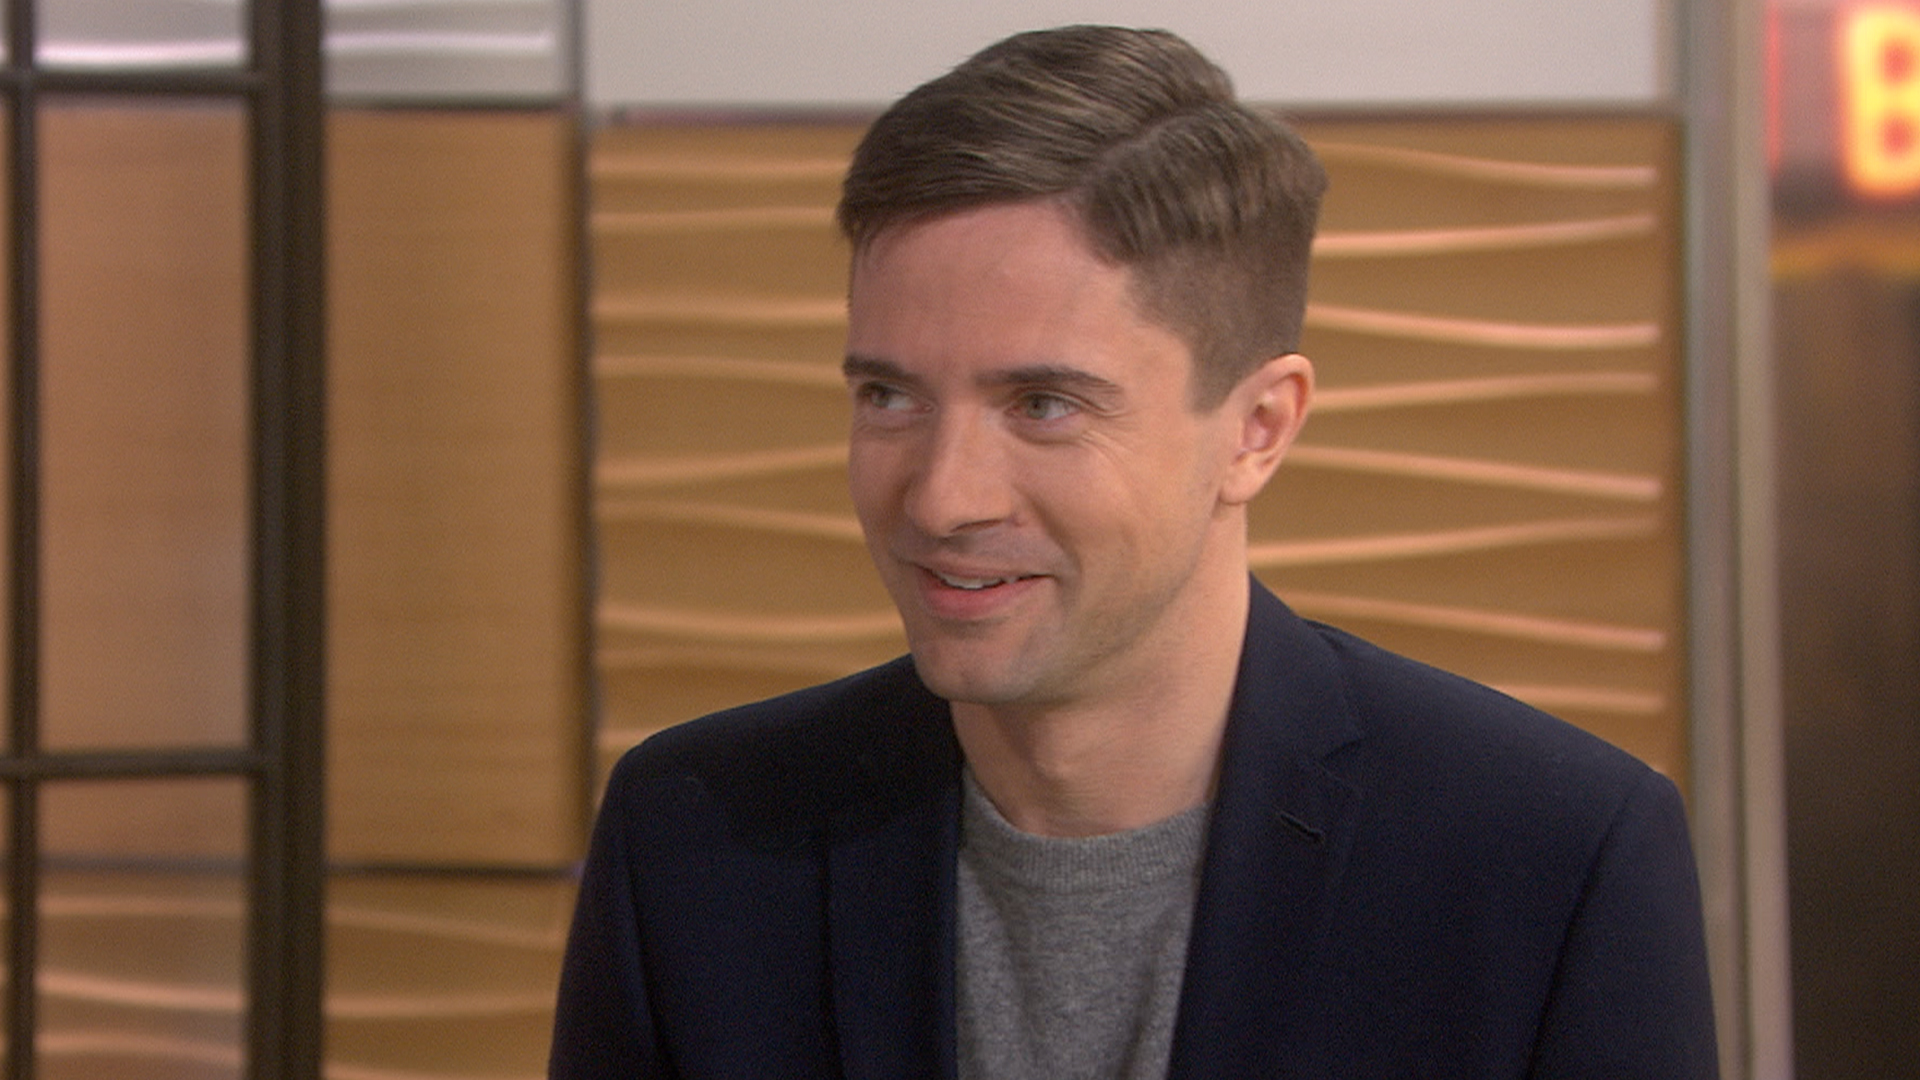 Topher Grace jokes about filming ‘War Machine’ with ‘B.P.’